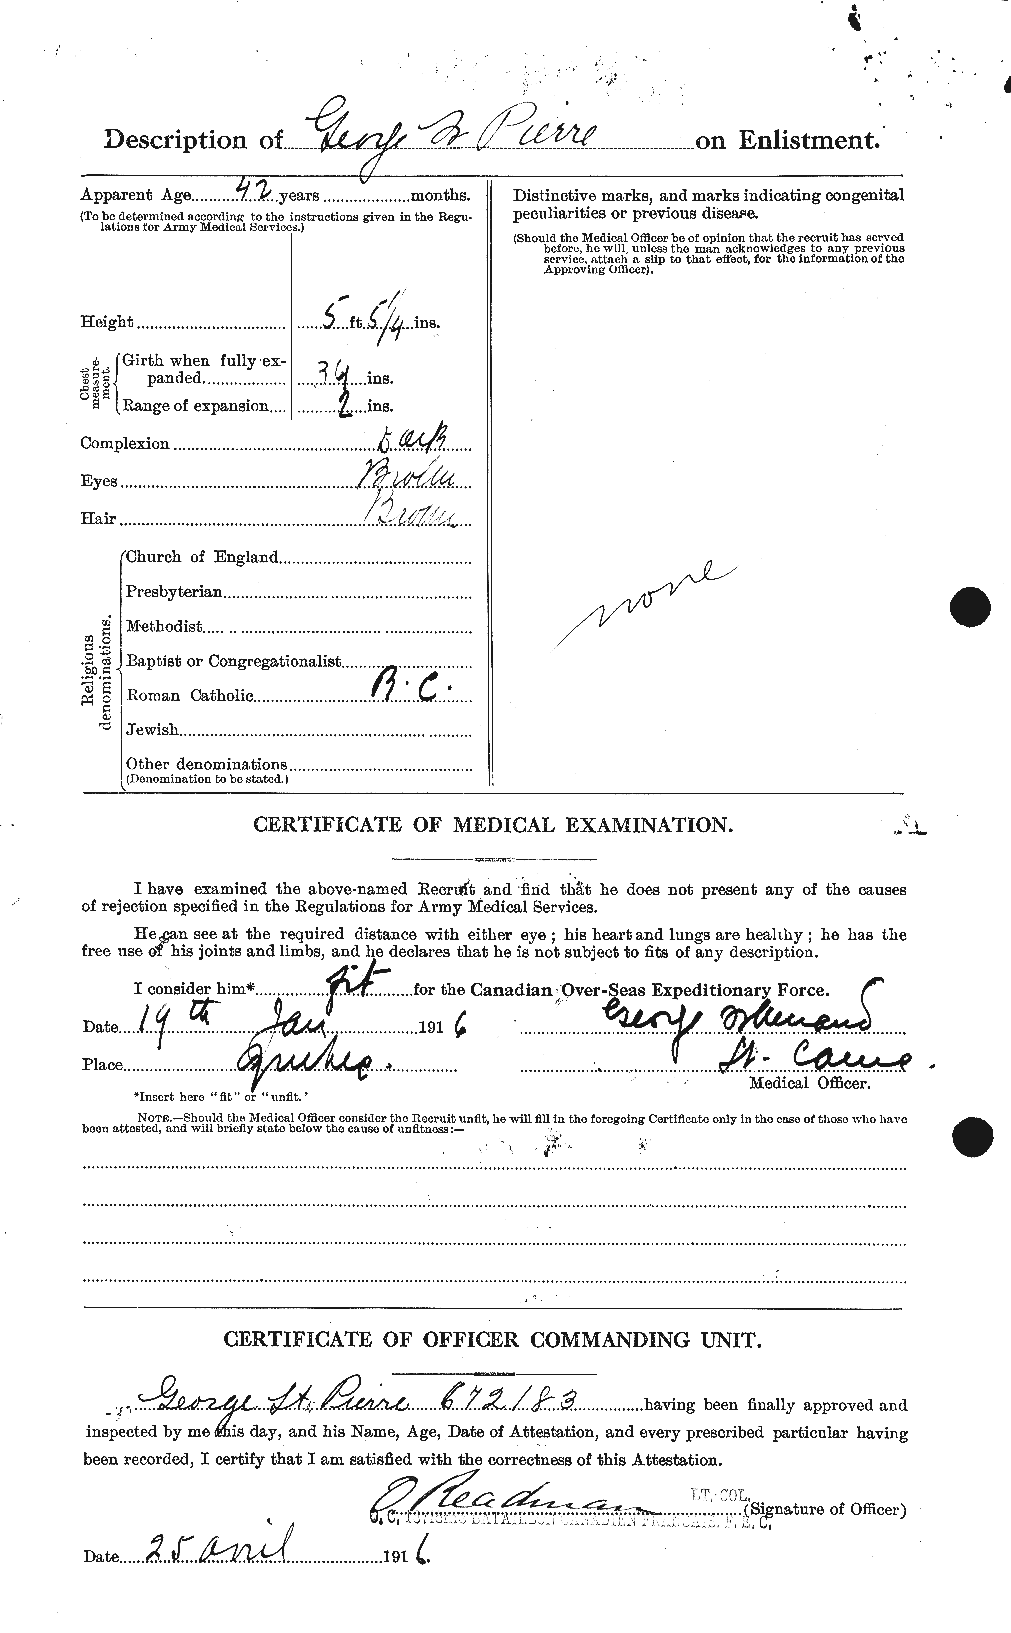 Personnel Records of the First World War - CEF 077818b